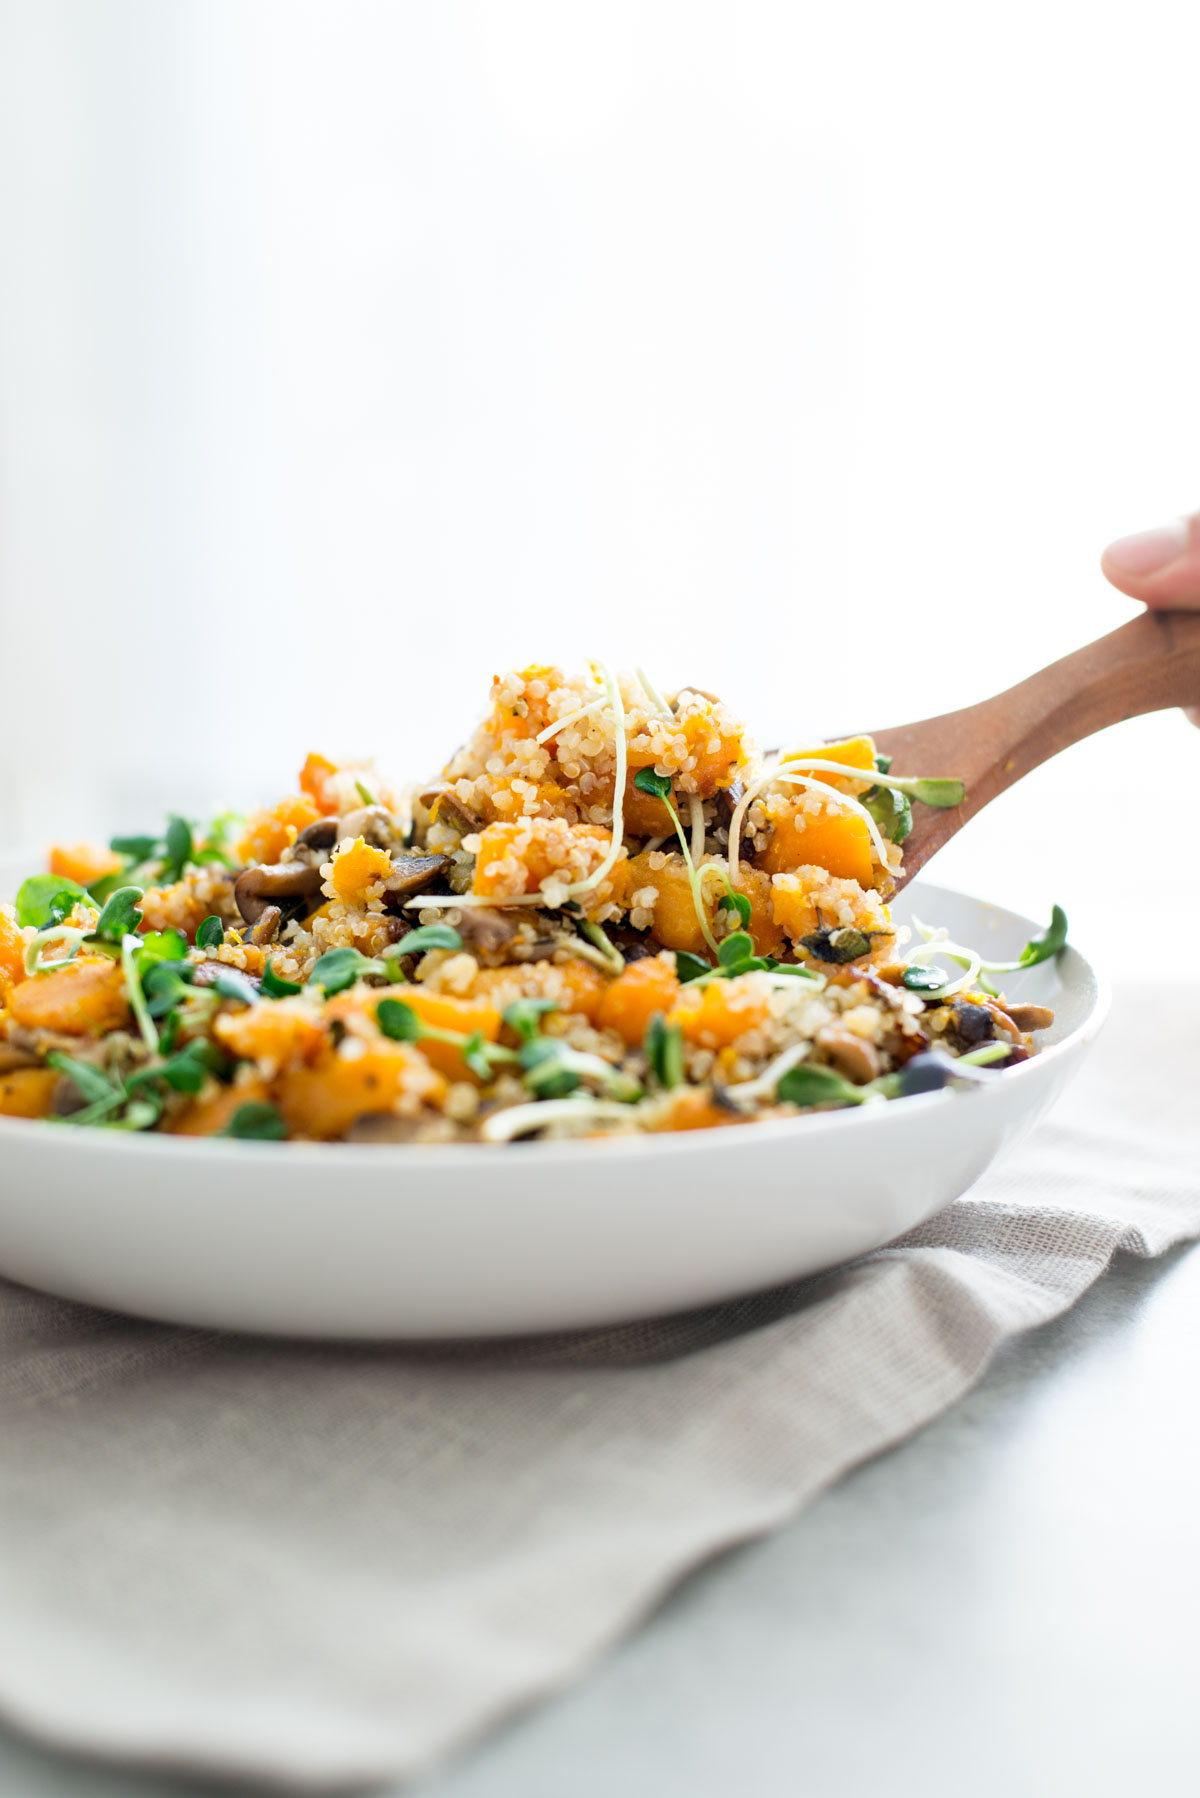 Did you know you shouldn't eat cold salads and smoothies during the fall and winter? Learn more and this delicious recipe for a warm butternut squash salad